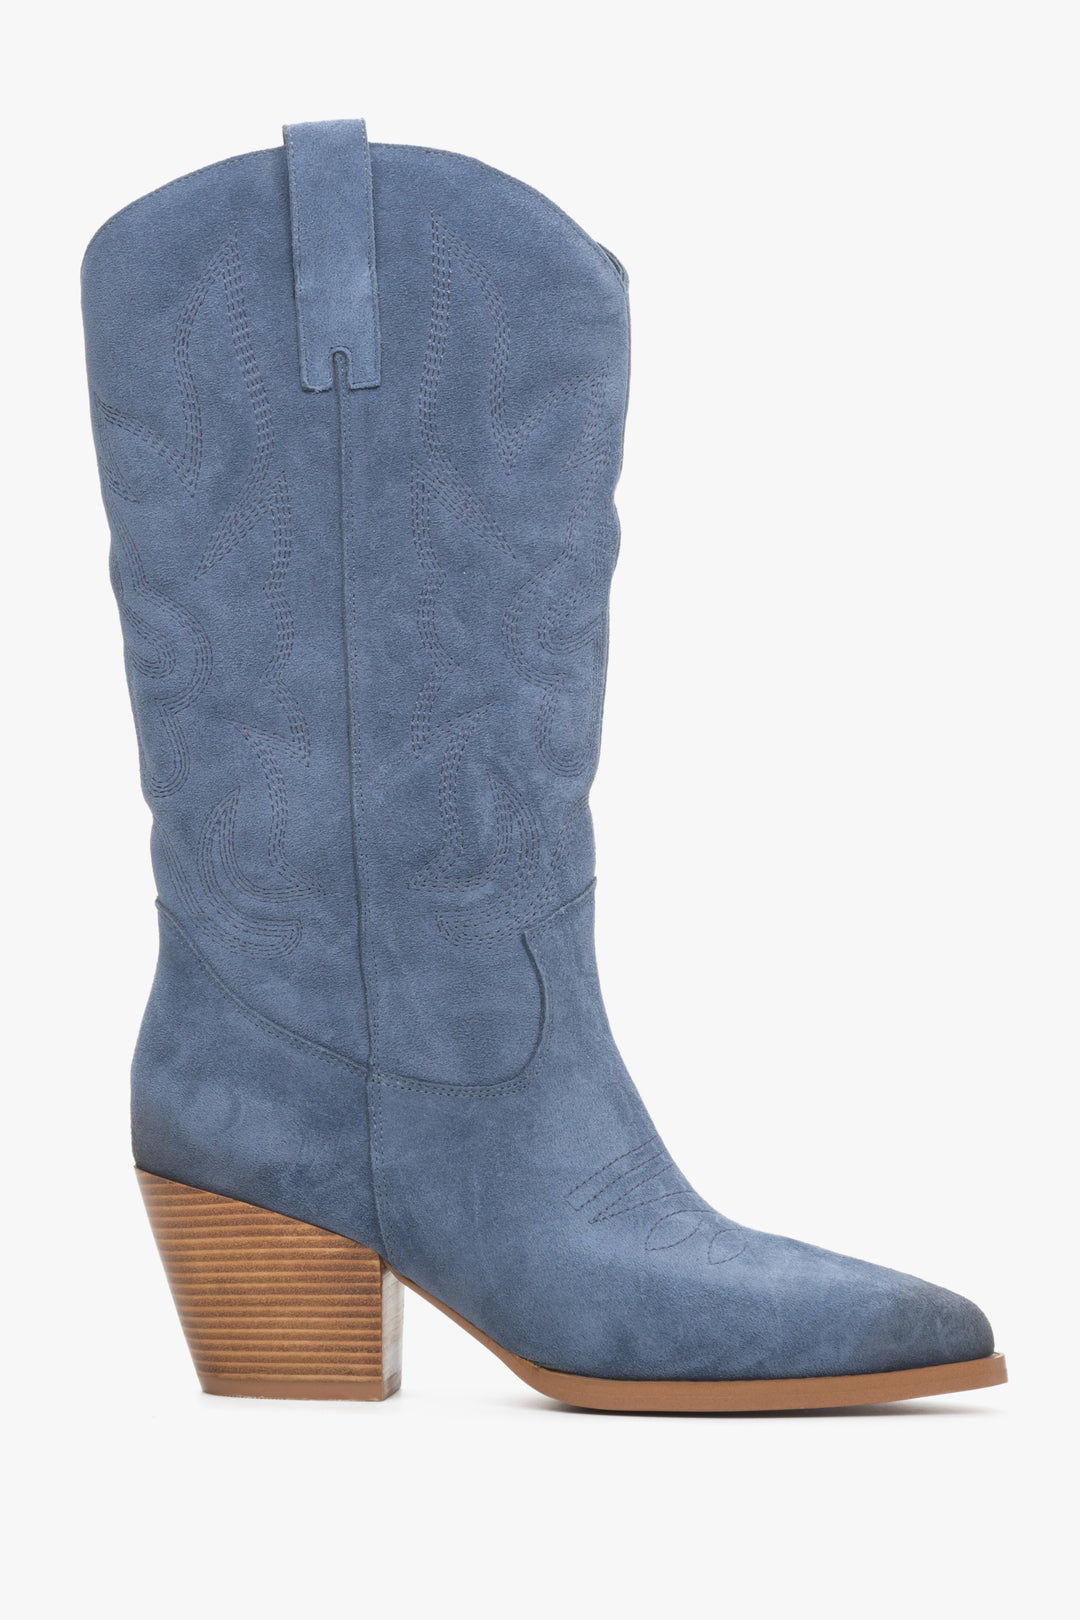 Velour women's cowboy boots with a high upper in blue by Estro - shoe profile.